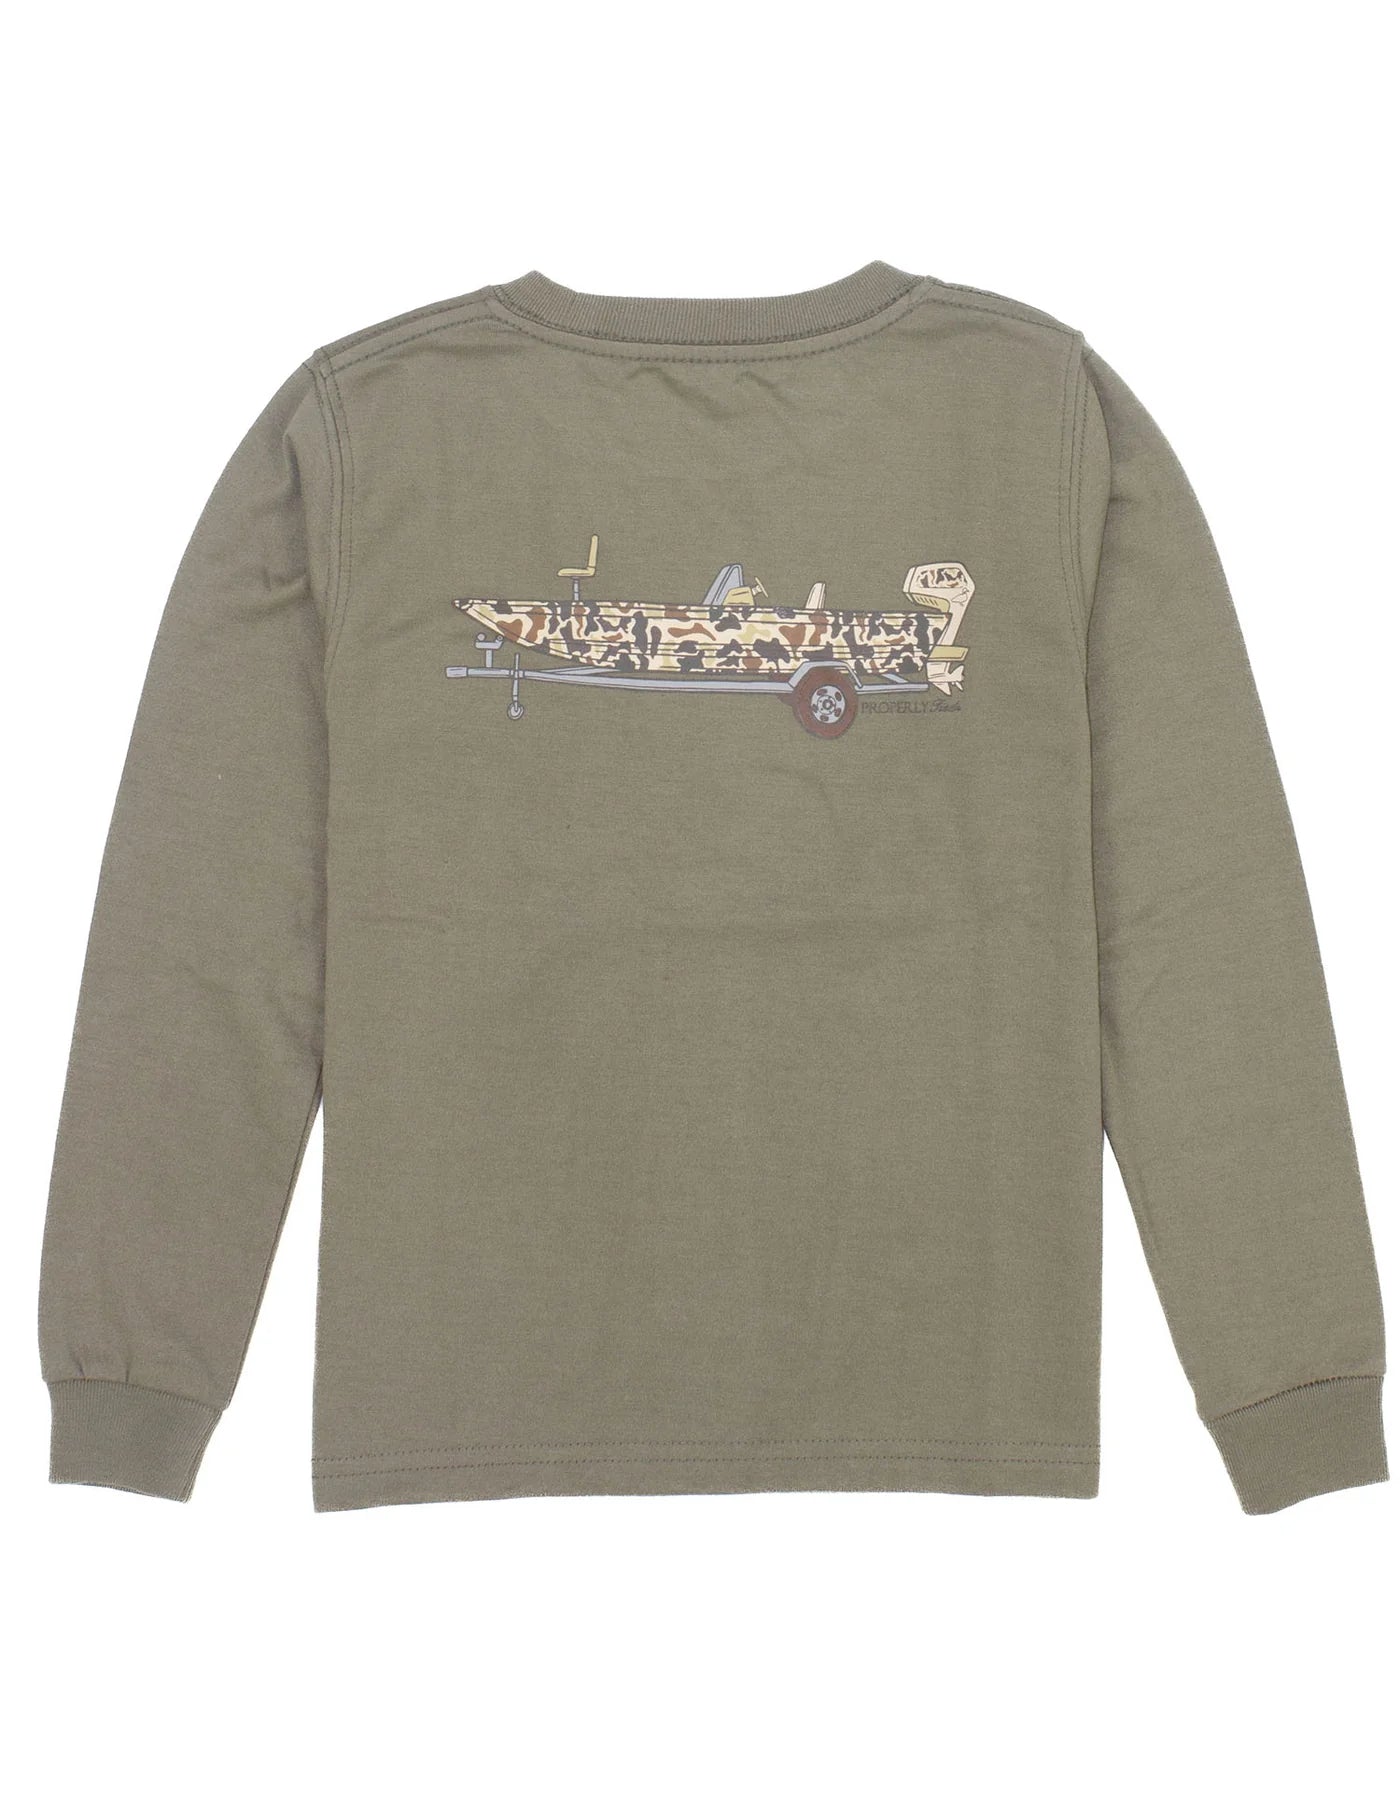 Properly Tied: Boys Camp Boat LS Tan